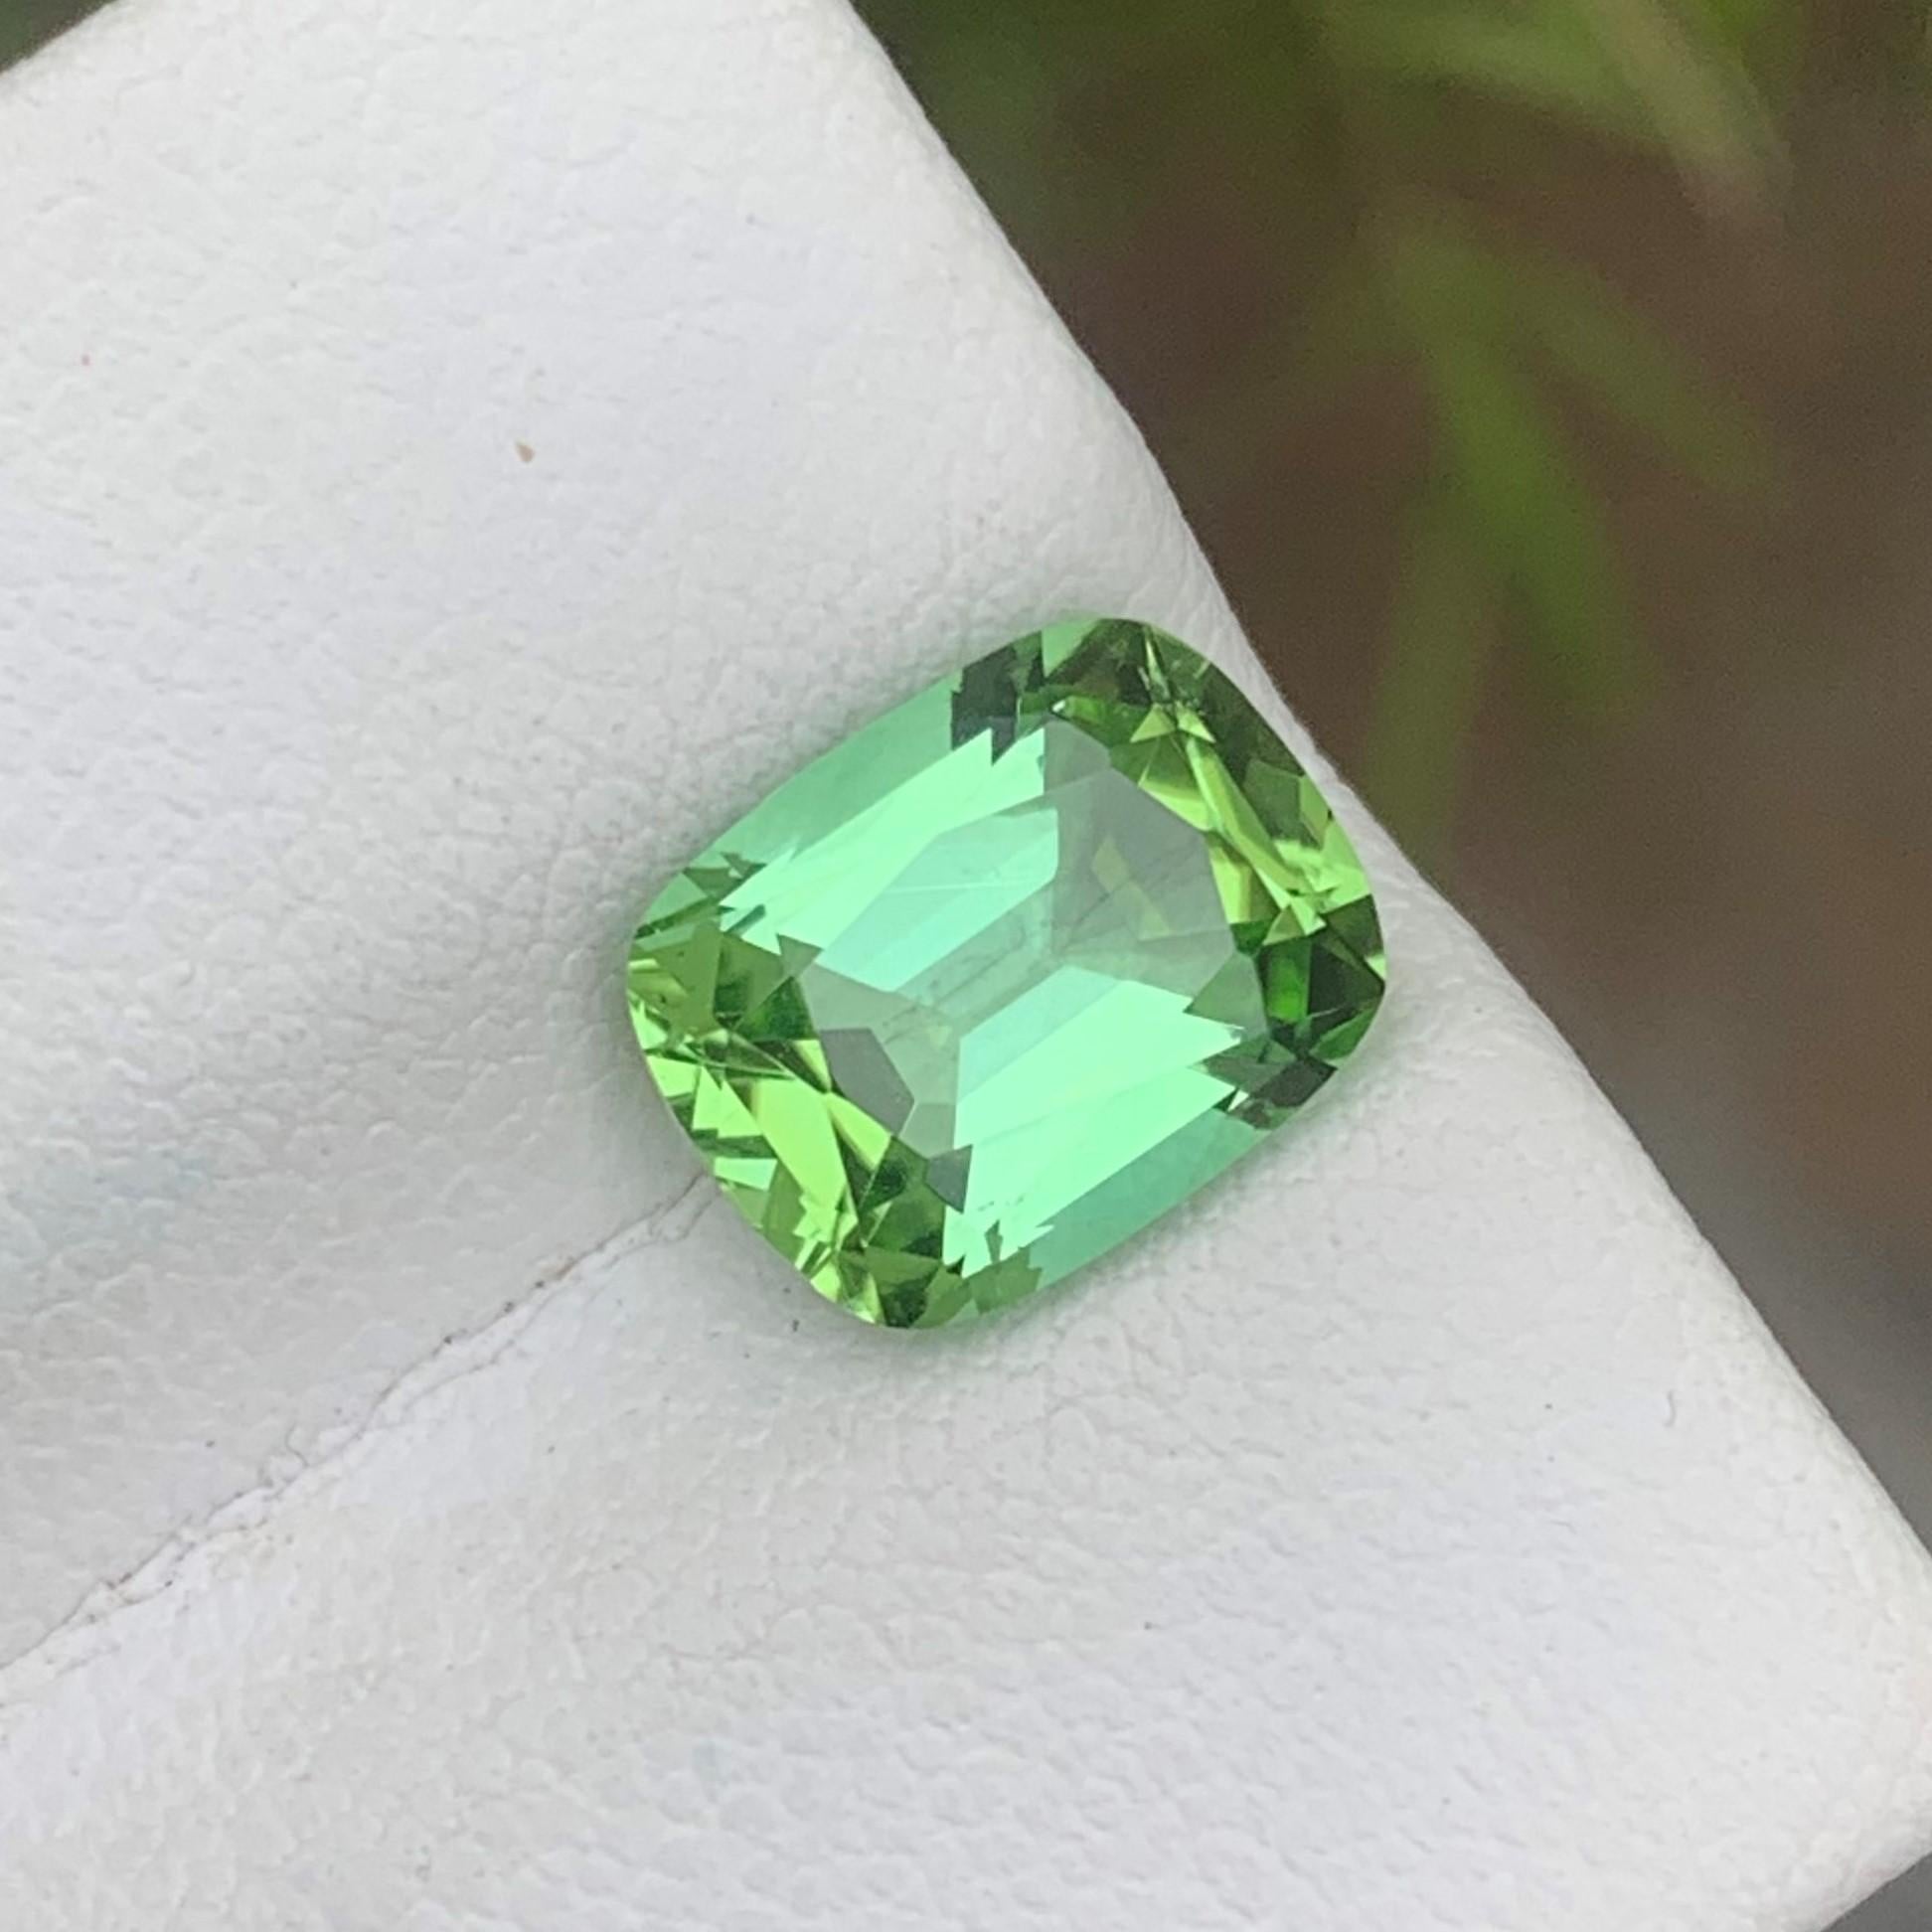 Gemstone Type : Tourmaline
Weight : 2.65 Carats
Dimensions : 9.4x7.4x5.1 Mm
Origin : Kunar Afghanistan
Clarity : Eye Clean
Shape: Cushion
Color: Mintgreen
Certificate: On Demand
Basically, mint tourmalines are tourmalines with pastel hues of light